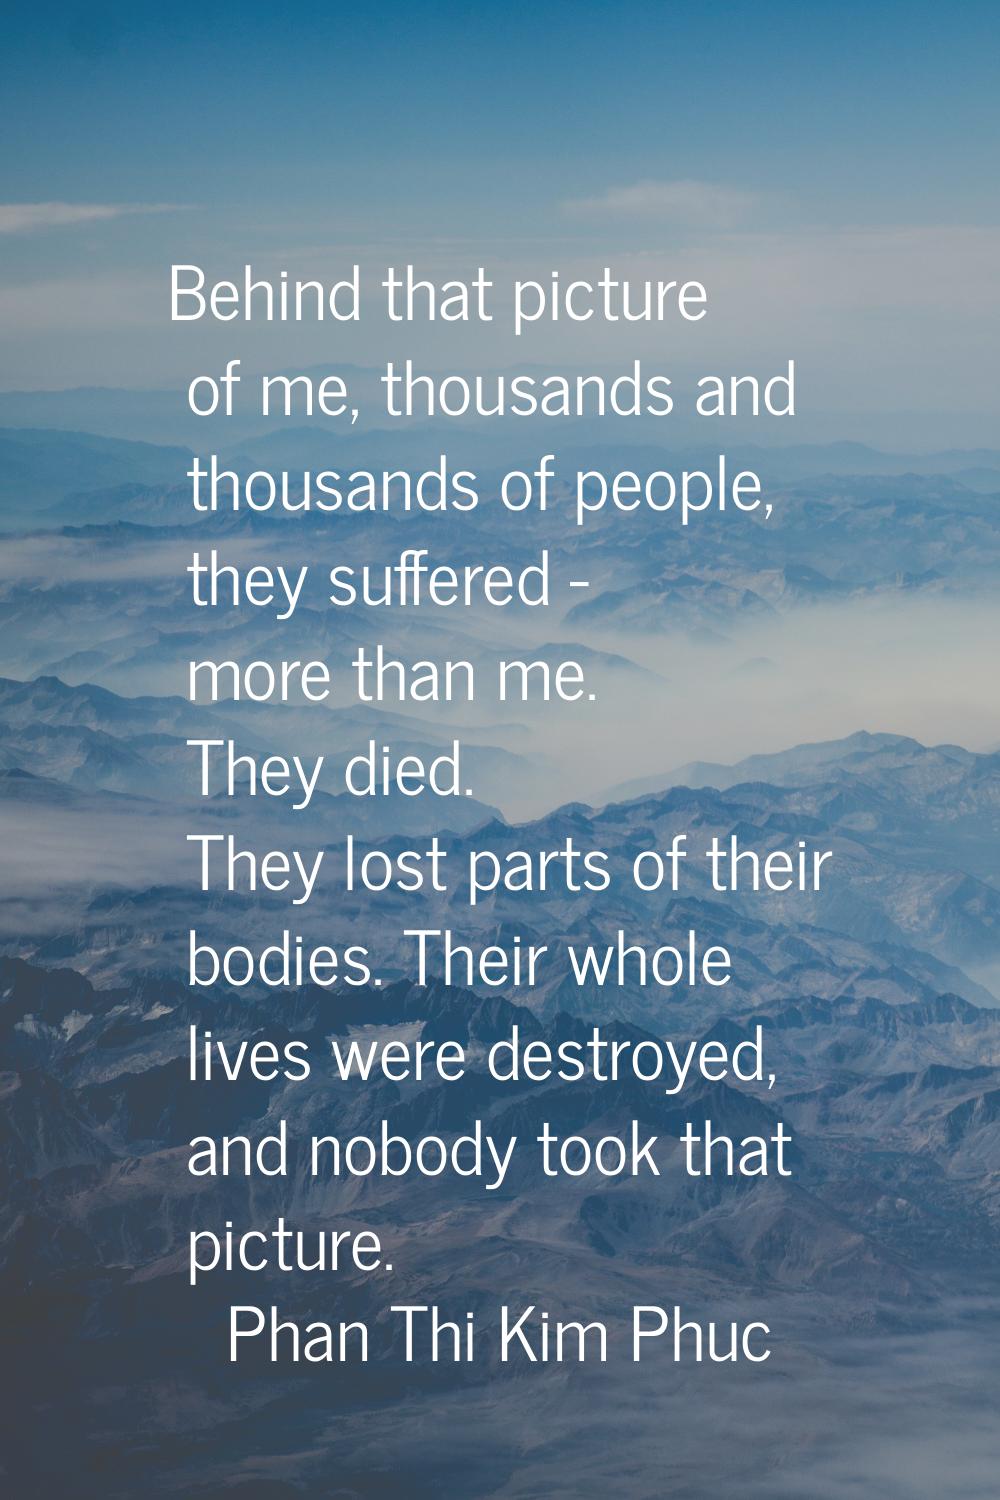 Behind that picture of me, thousands and thousands of people, they suffered - more than me. They di